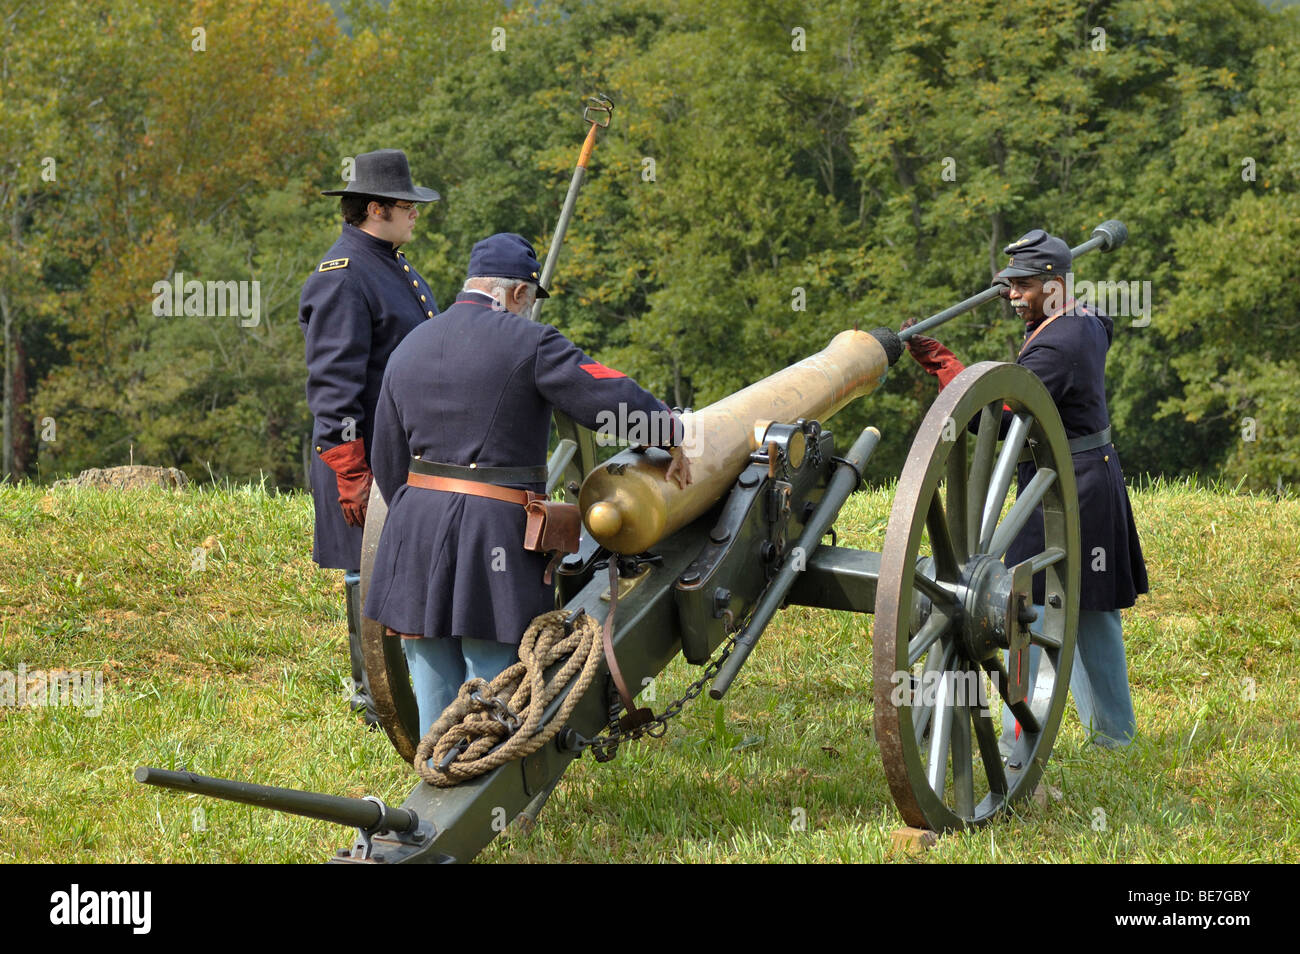 Union soldier re-enactors loading an American Civil War Cannon at the Civil War Fort at Boonesboro, Kentucky, USA. Stock Photo